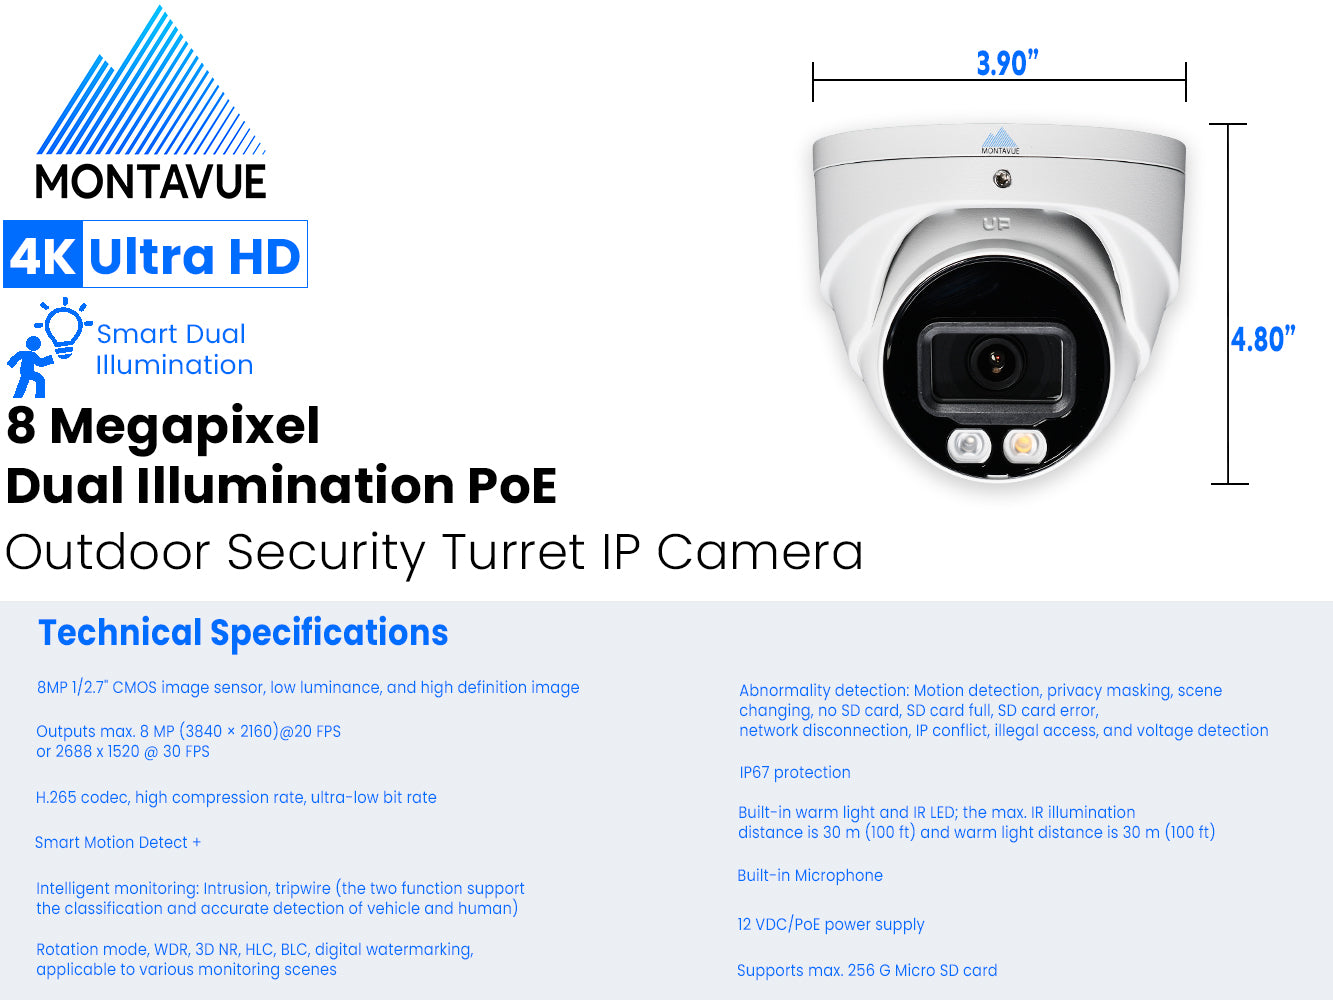 MTT8095 | 8MP 4K Turret Security Camera with SMD+ and Smart Dual Illumination - Montavue